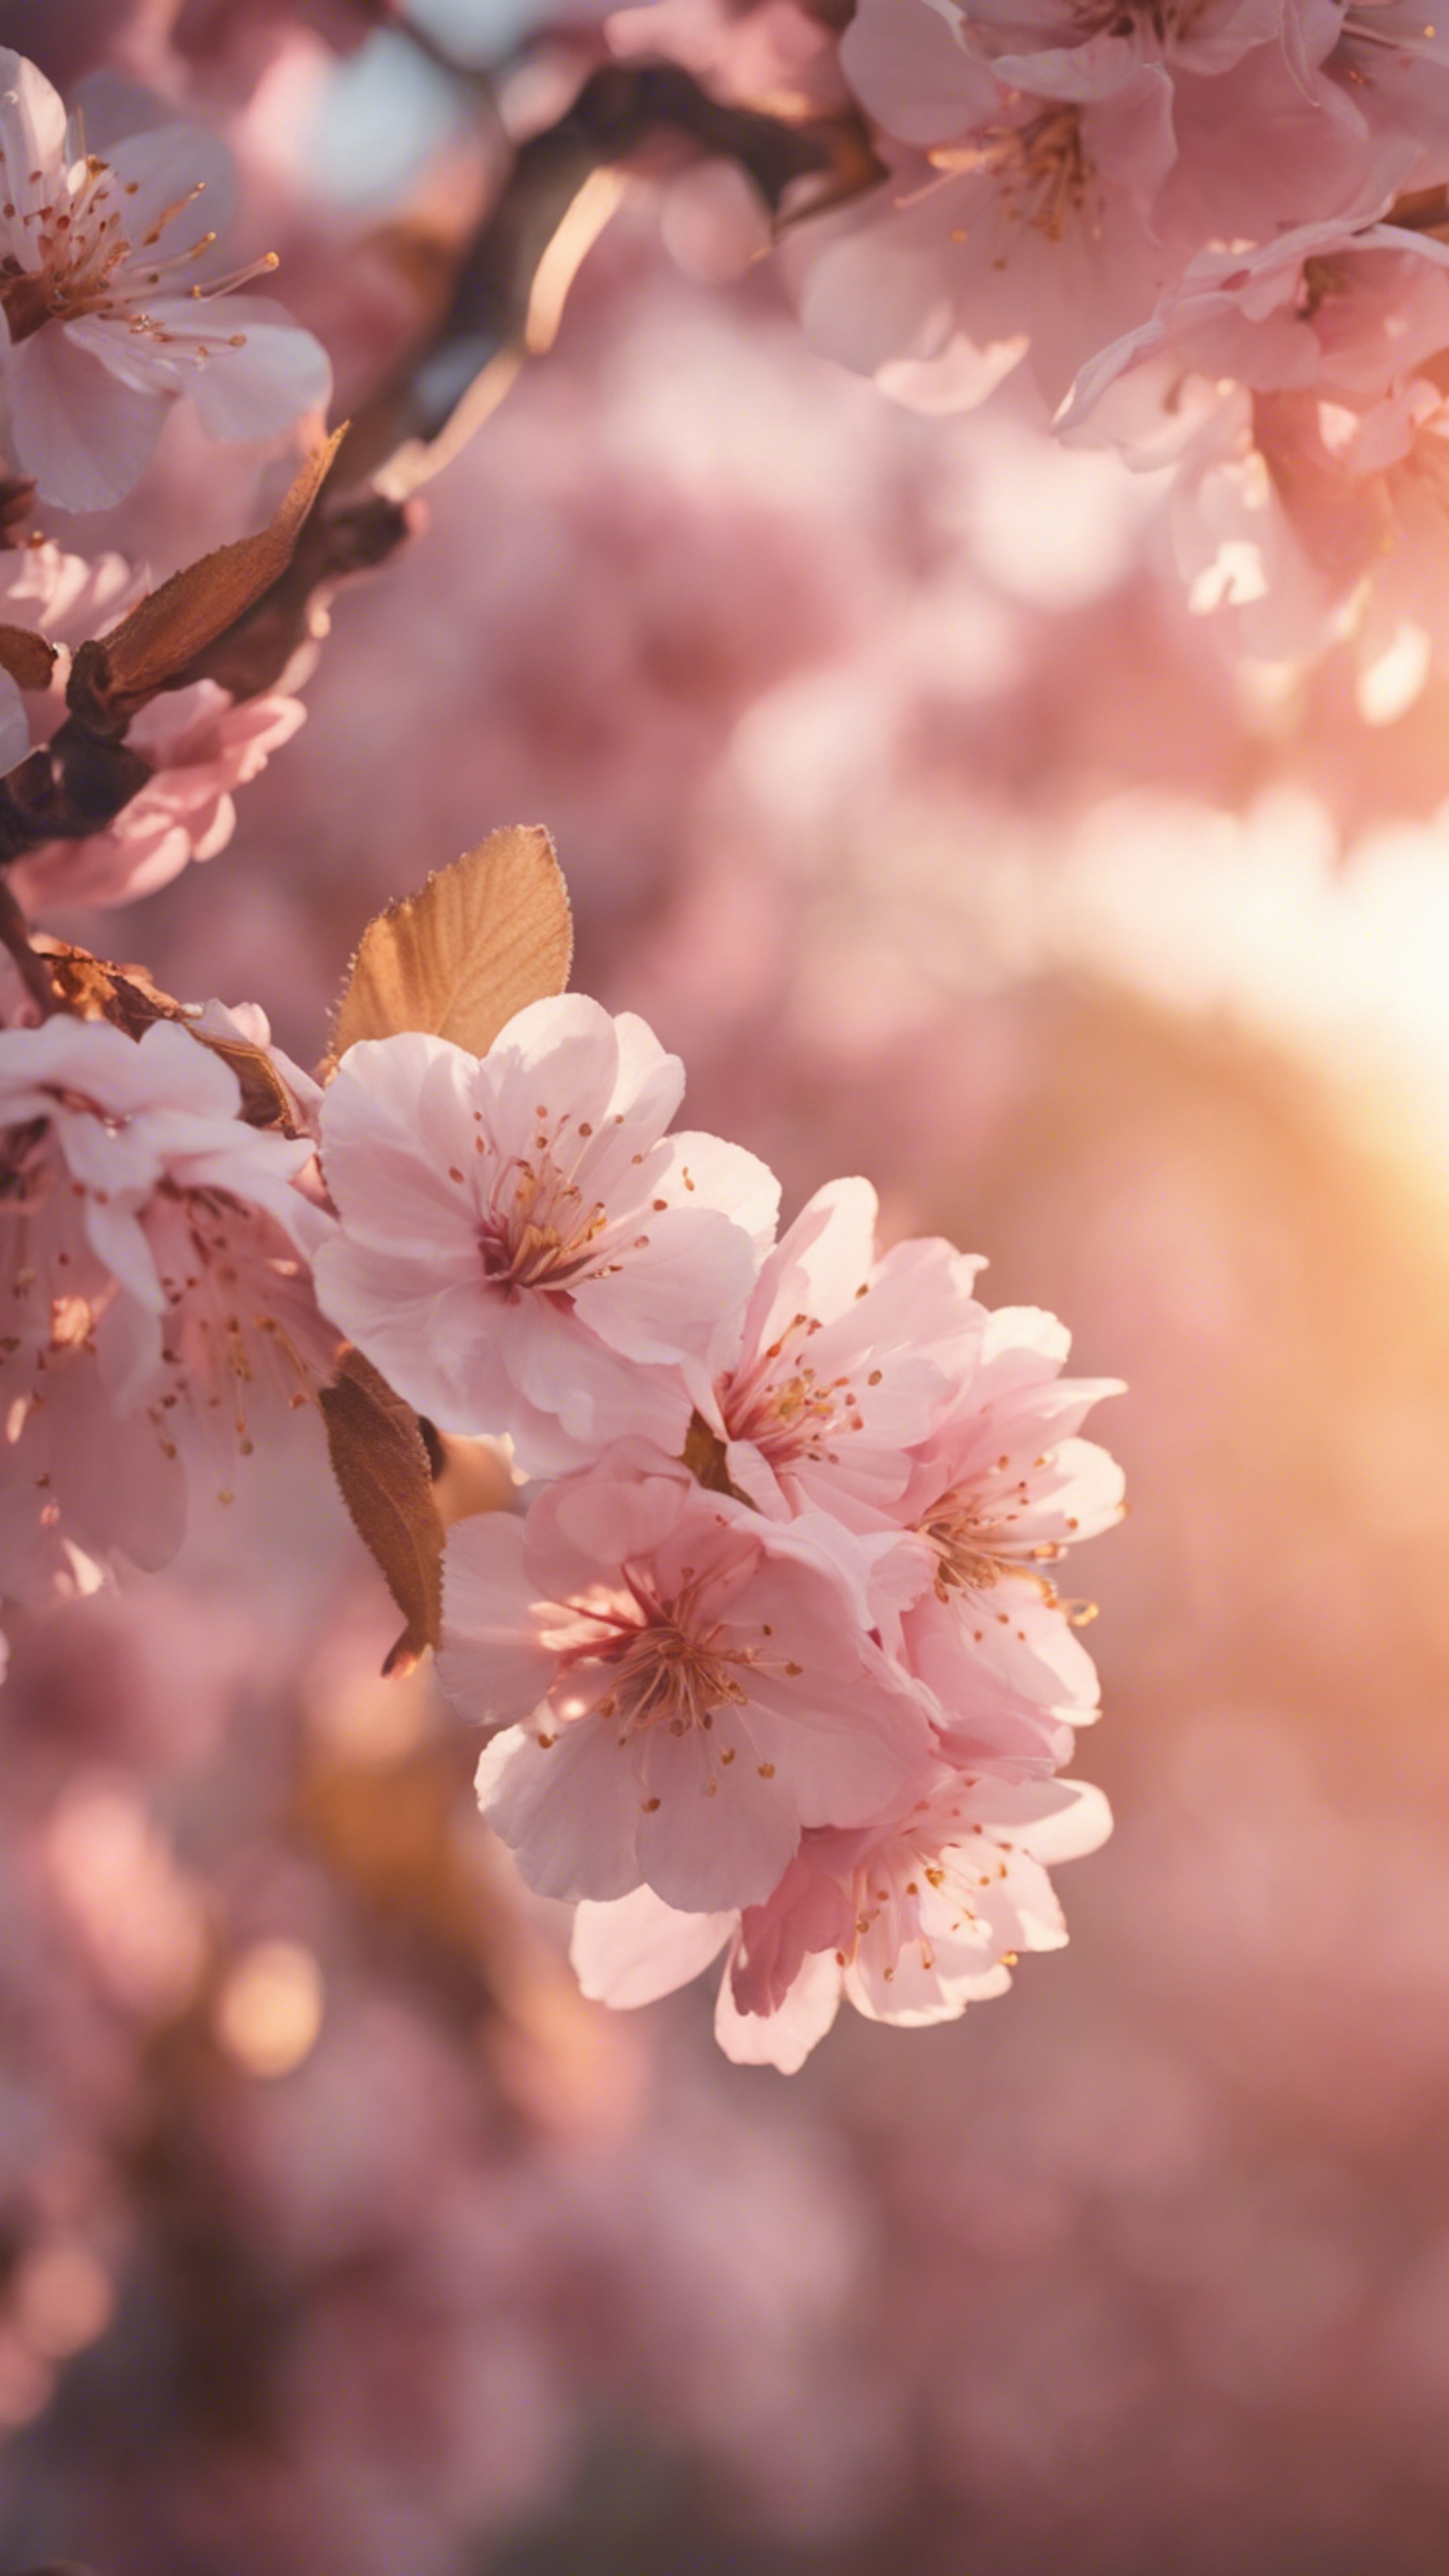 A delicate pink cherry blossom tree with gold leaves against a soft sunset. Ταπετσαρία[63878b5c392143fbba4e]